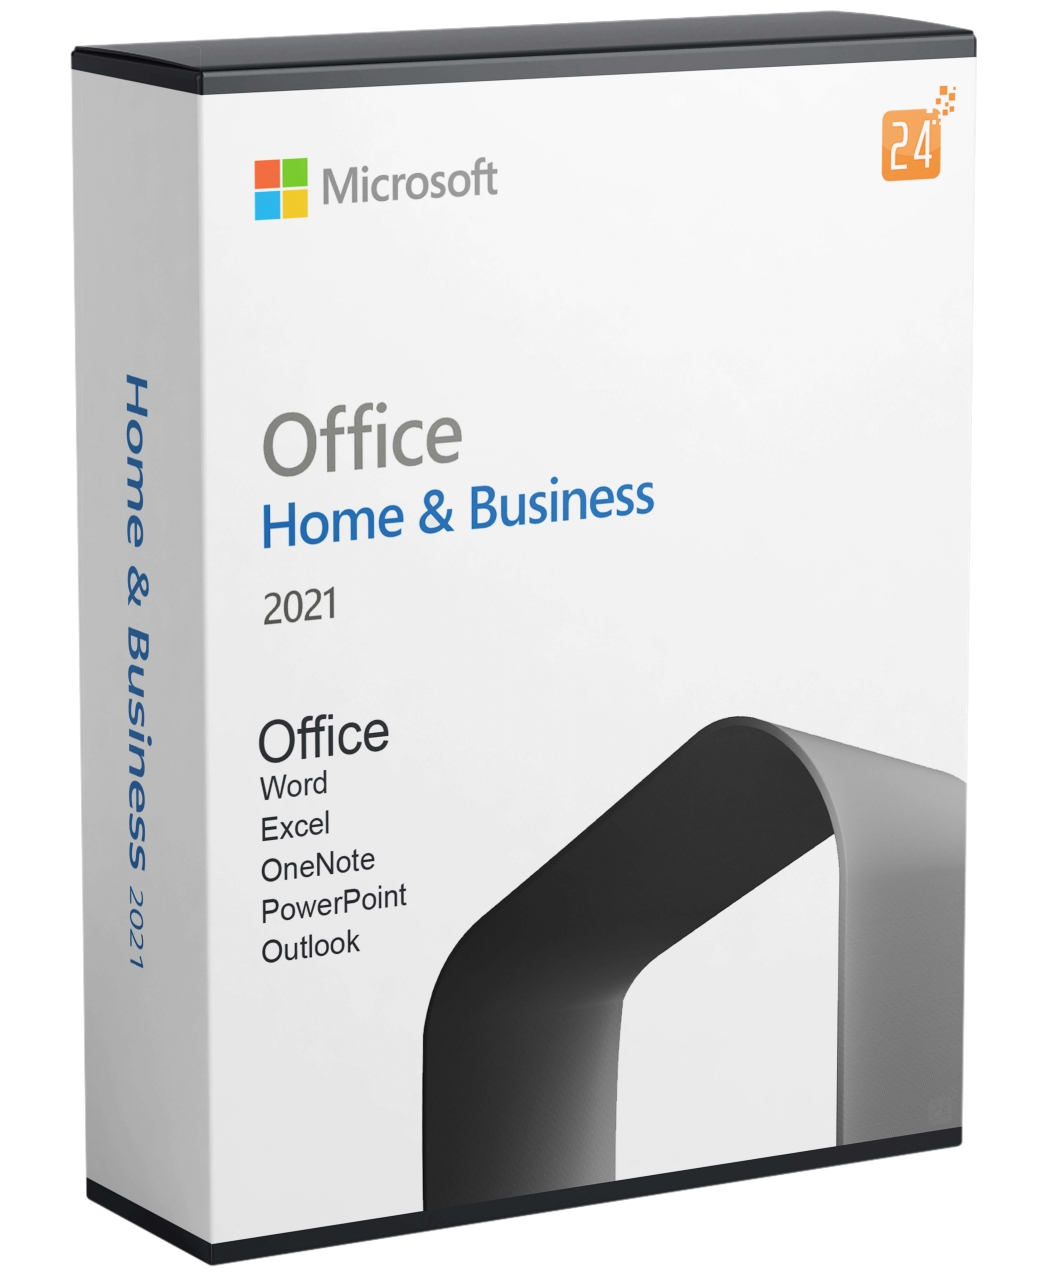 microsoft office home and student 2021 for mac download